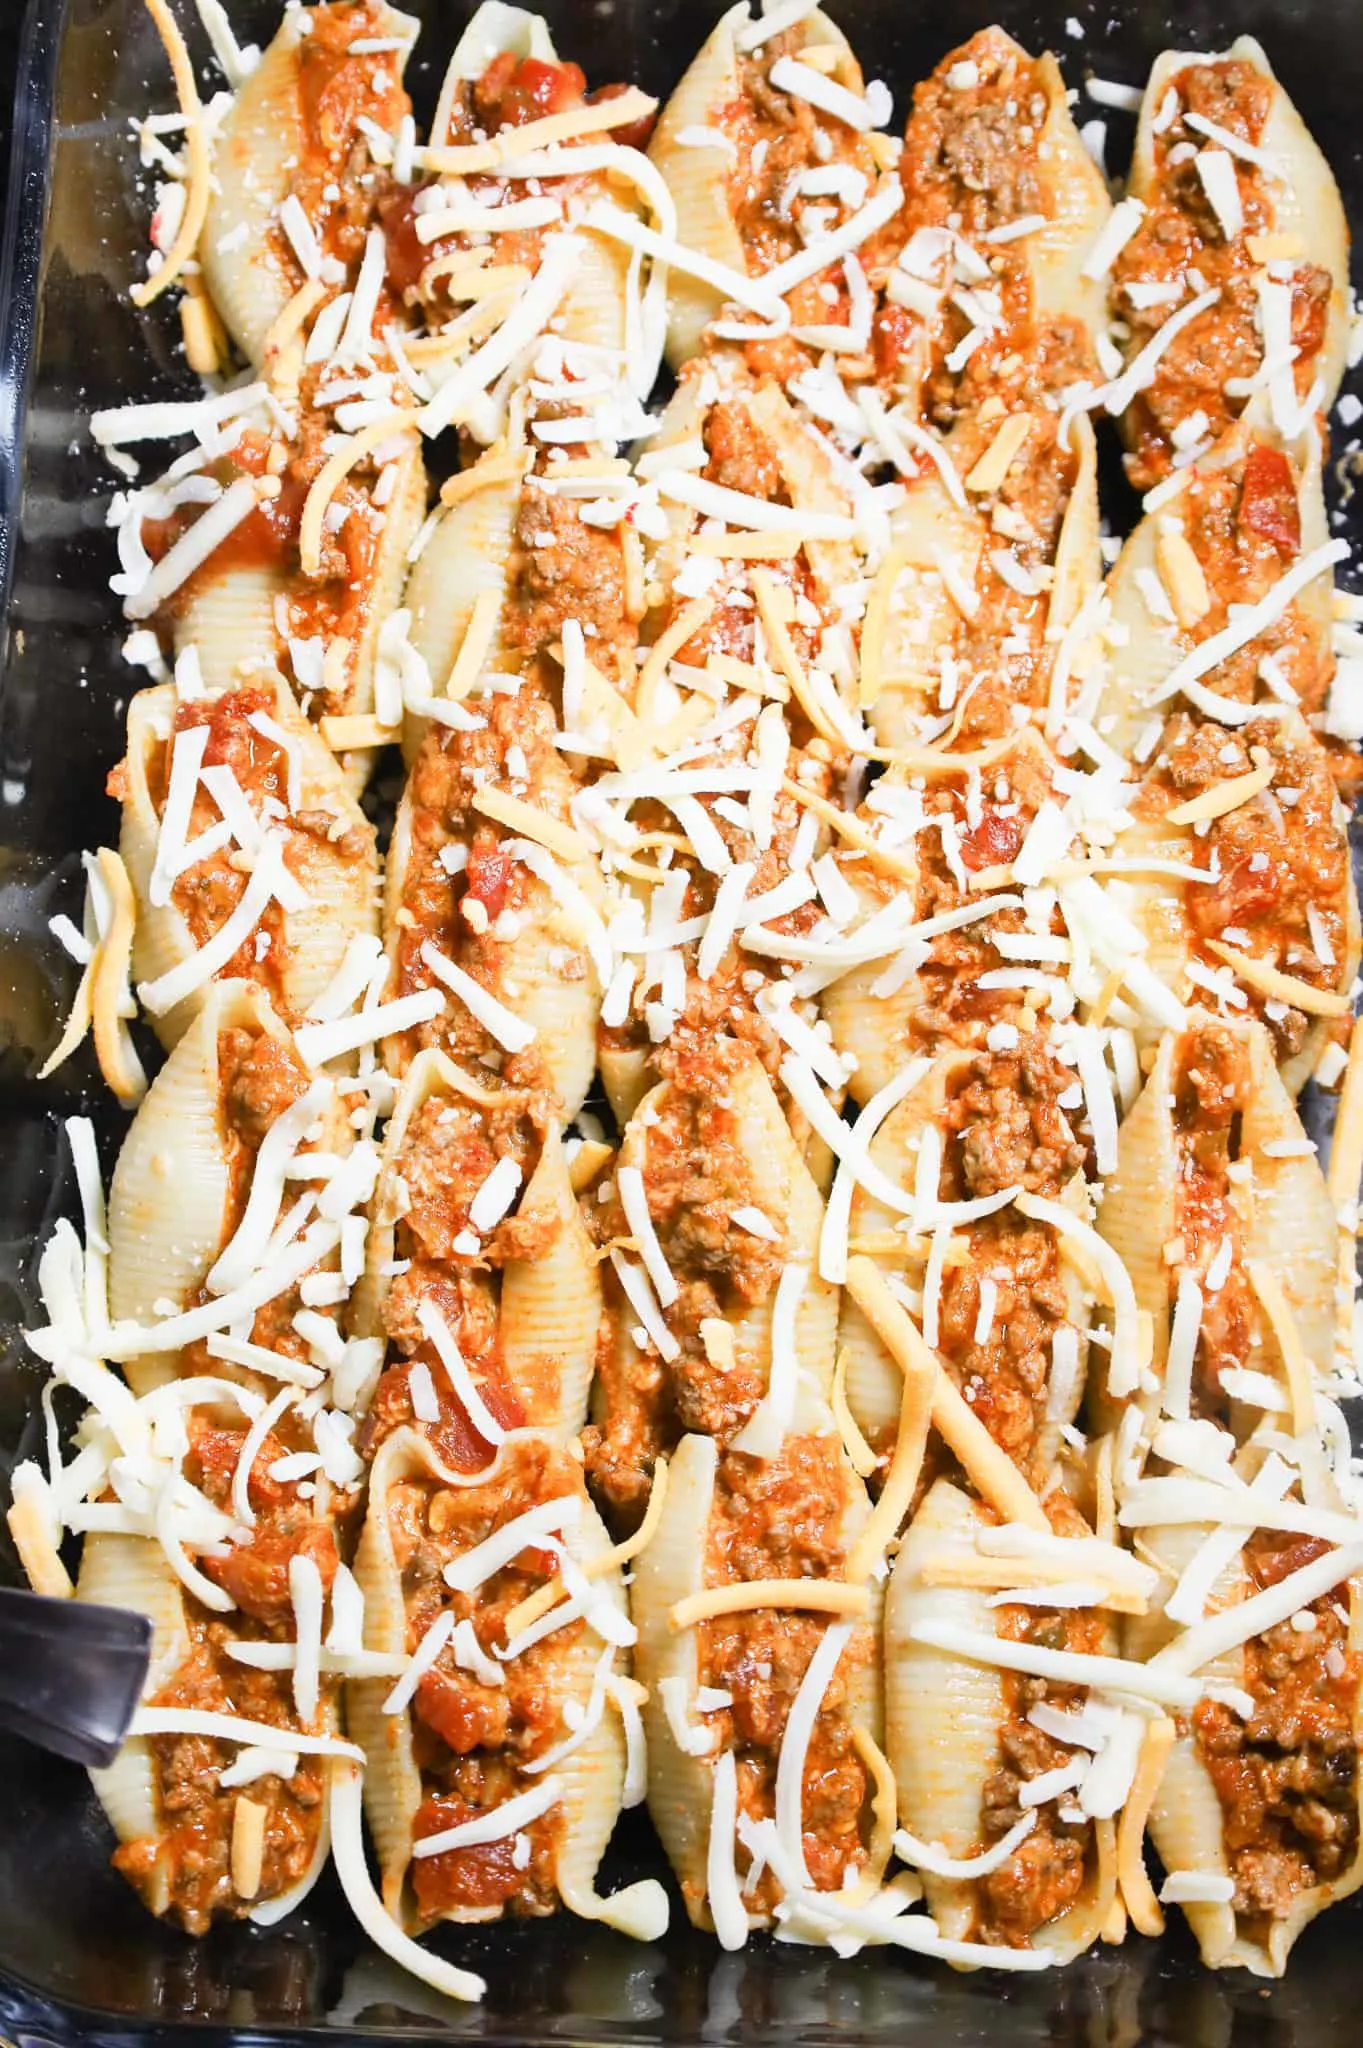 shredded cheese on top of stuffed pasta shells in a baking dish